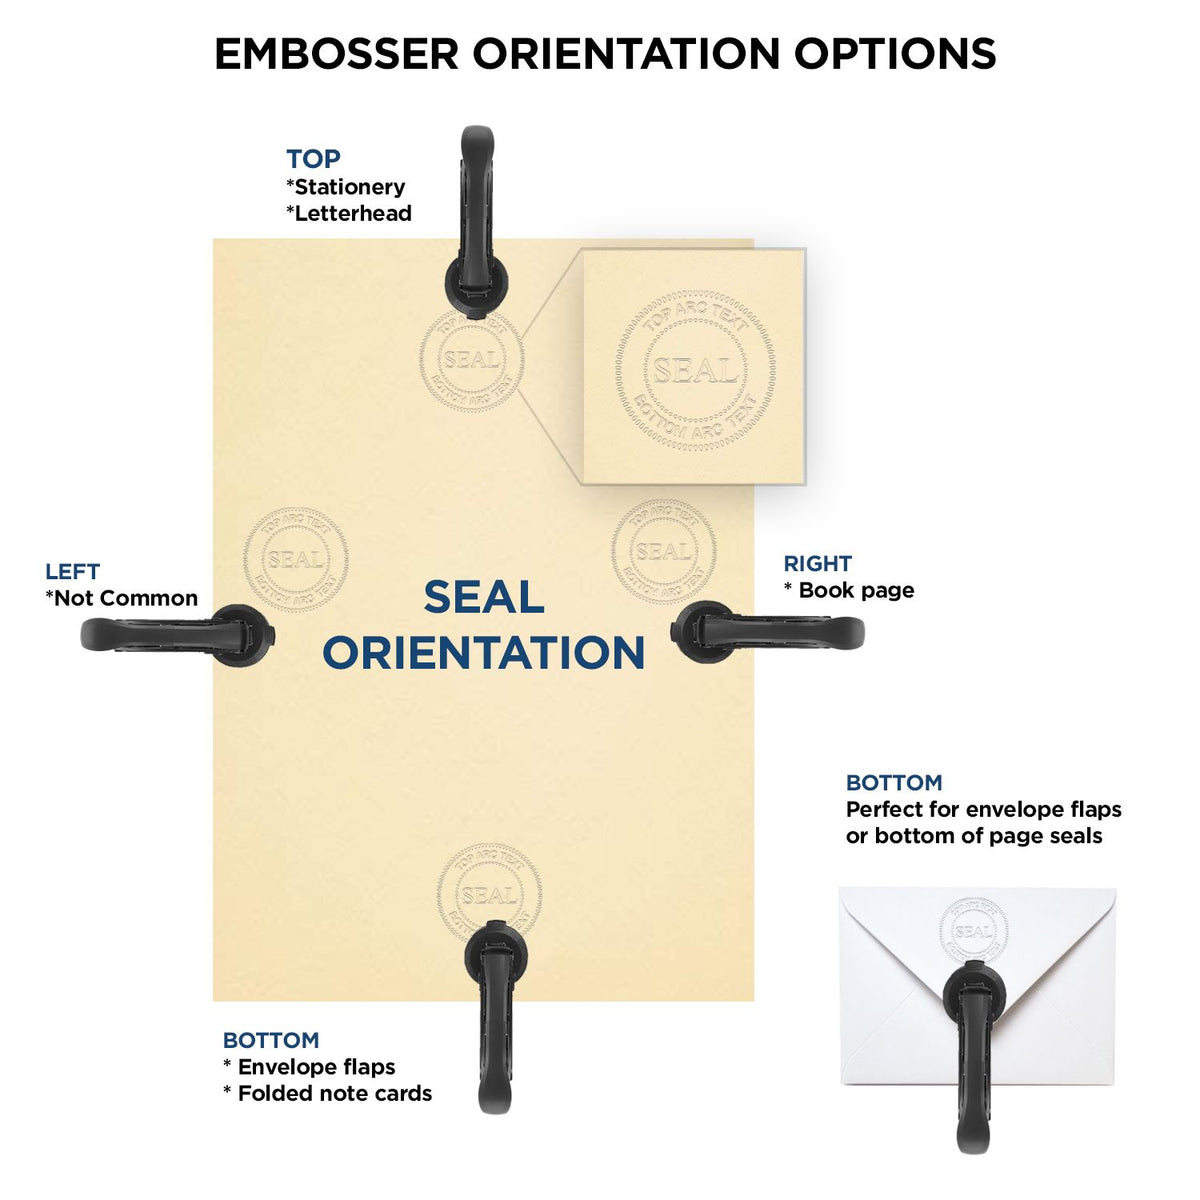 An infographic for the State of Missouri Extended Long Reach Geologist Seal showing embosser orientation, this is showing examples of a top, bottom, right and left insert.